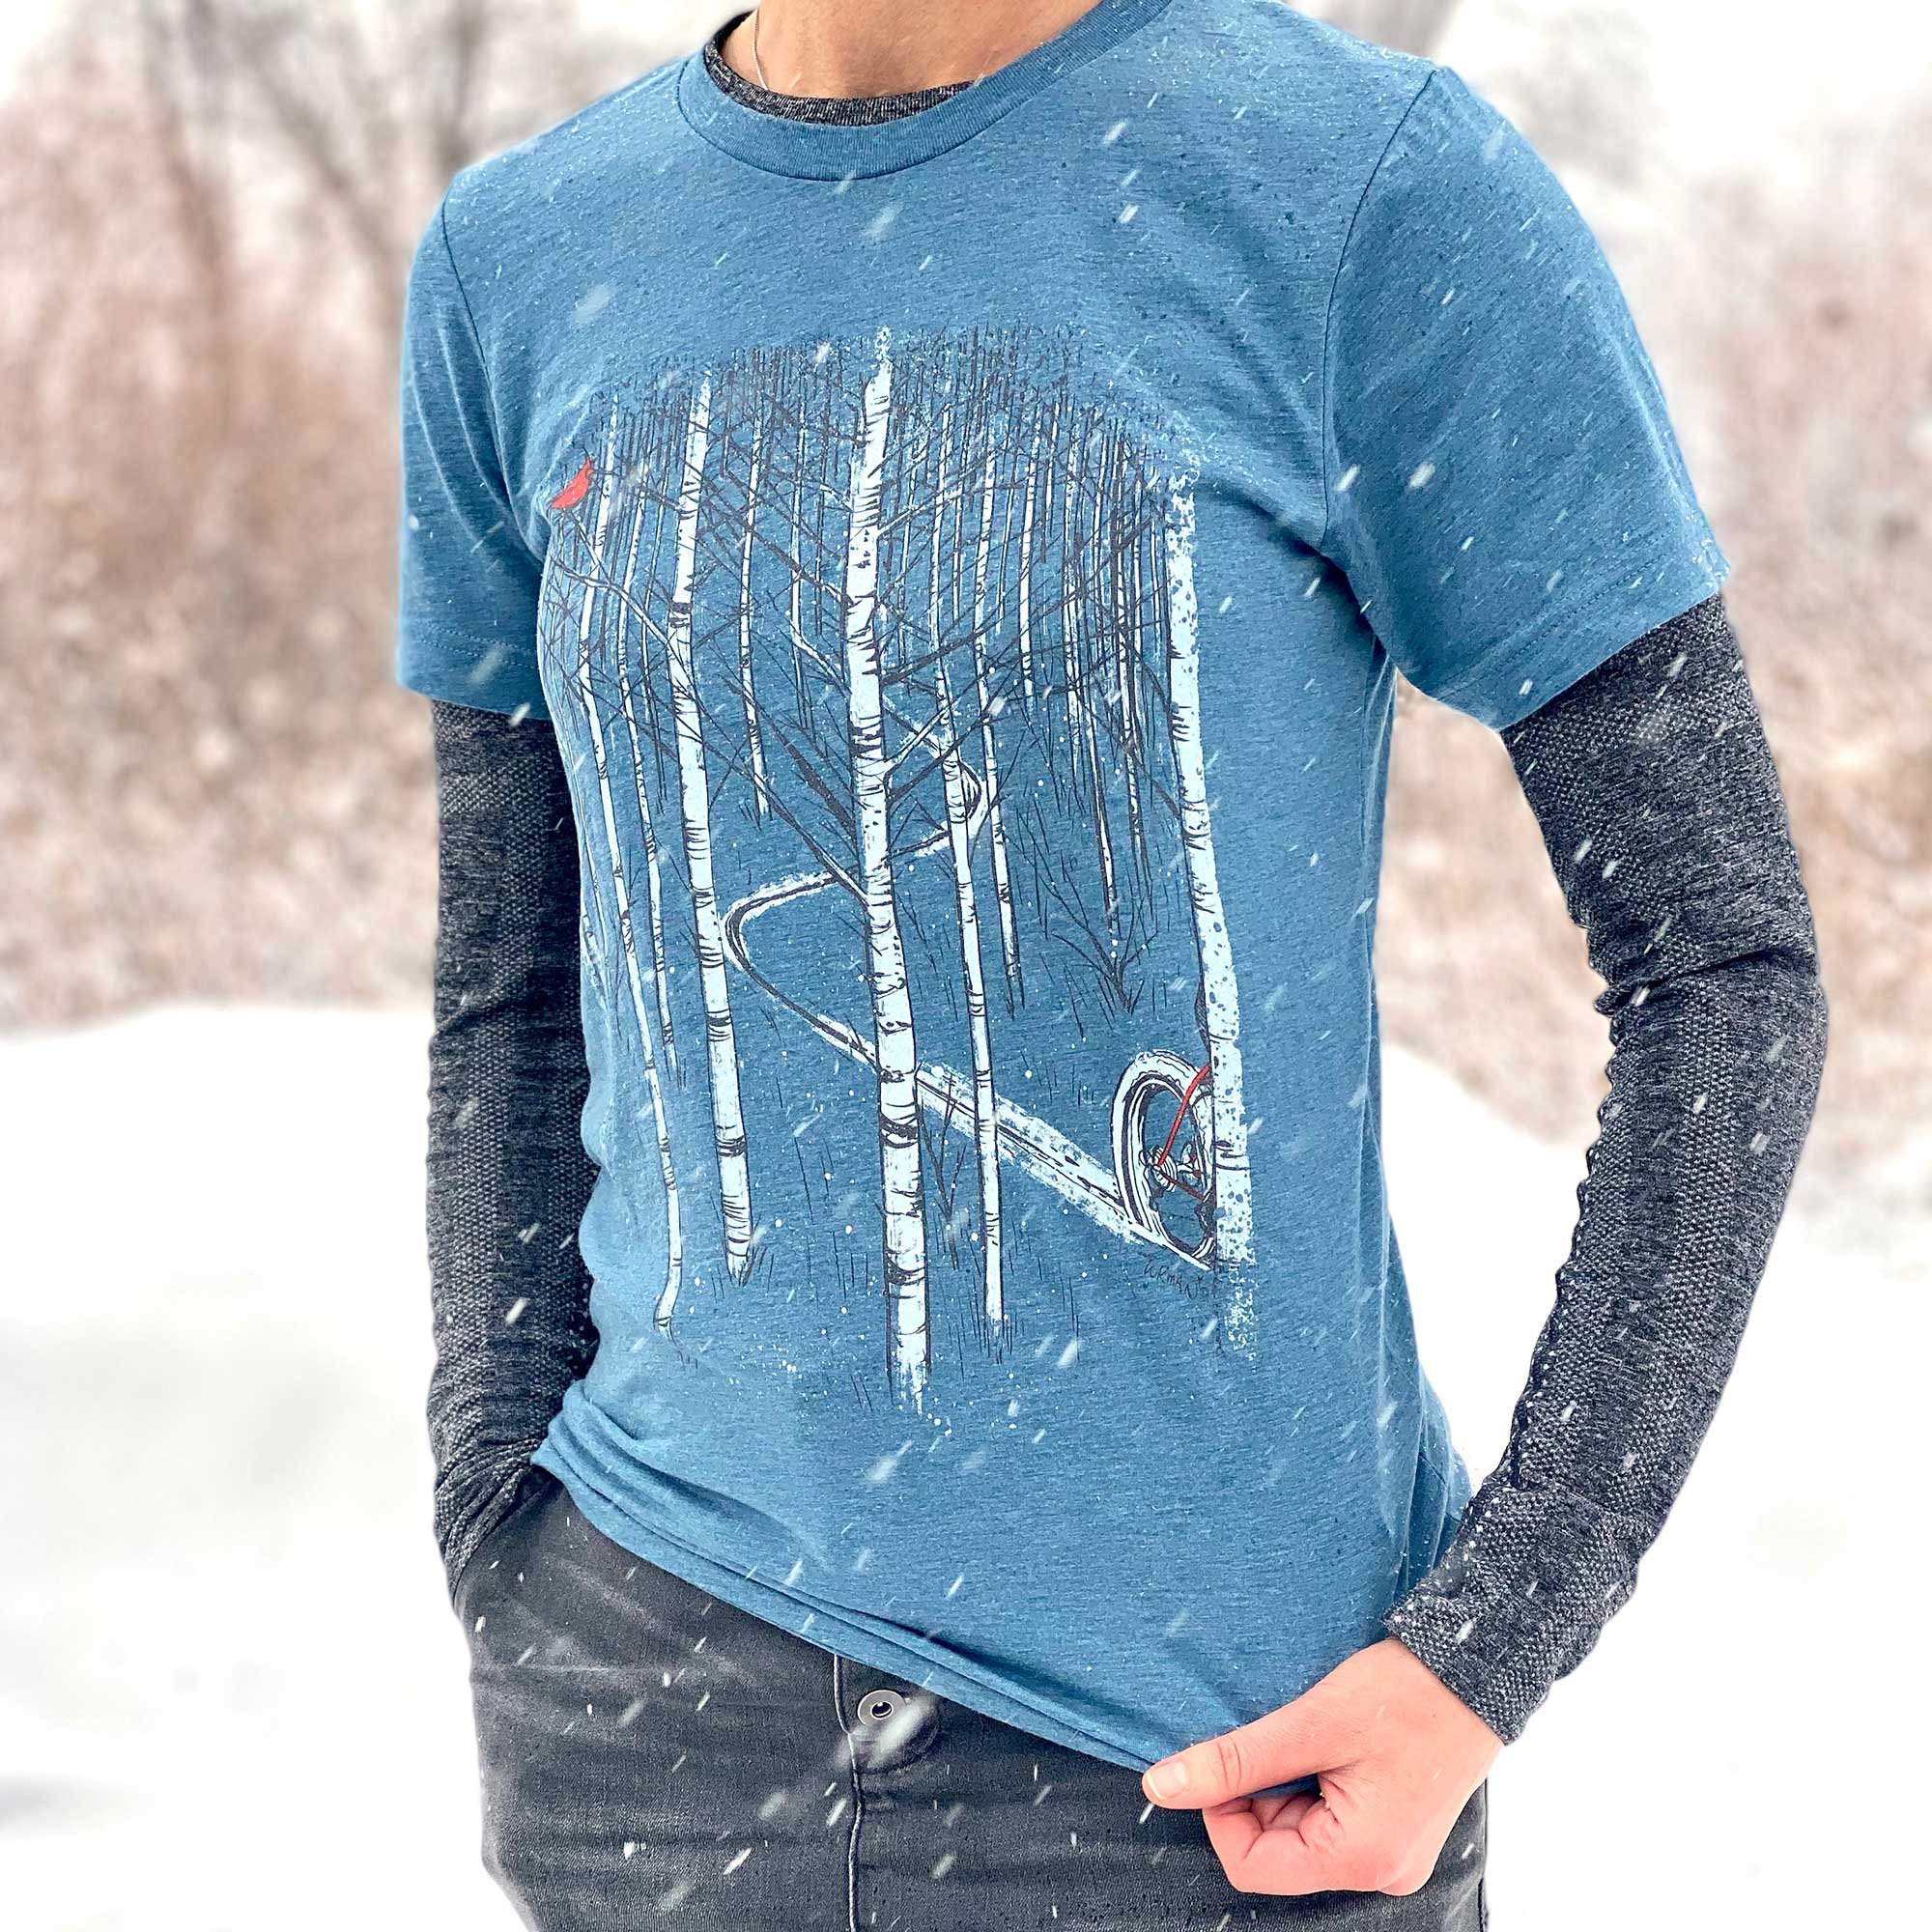 Cardinal - Fat Bike in the Snow with Birch Trees T-Shirt by Adam